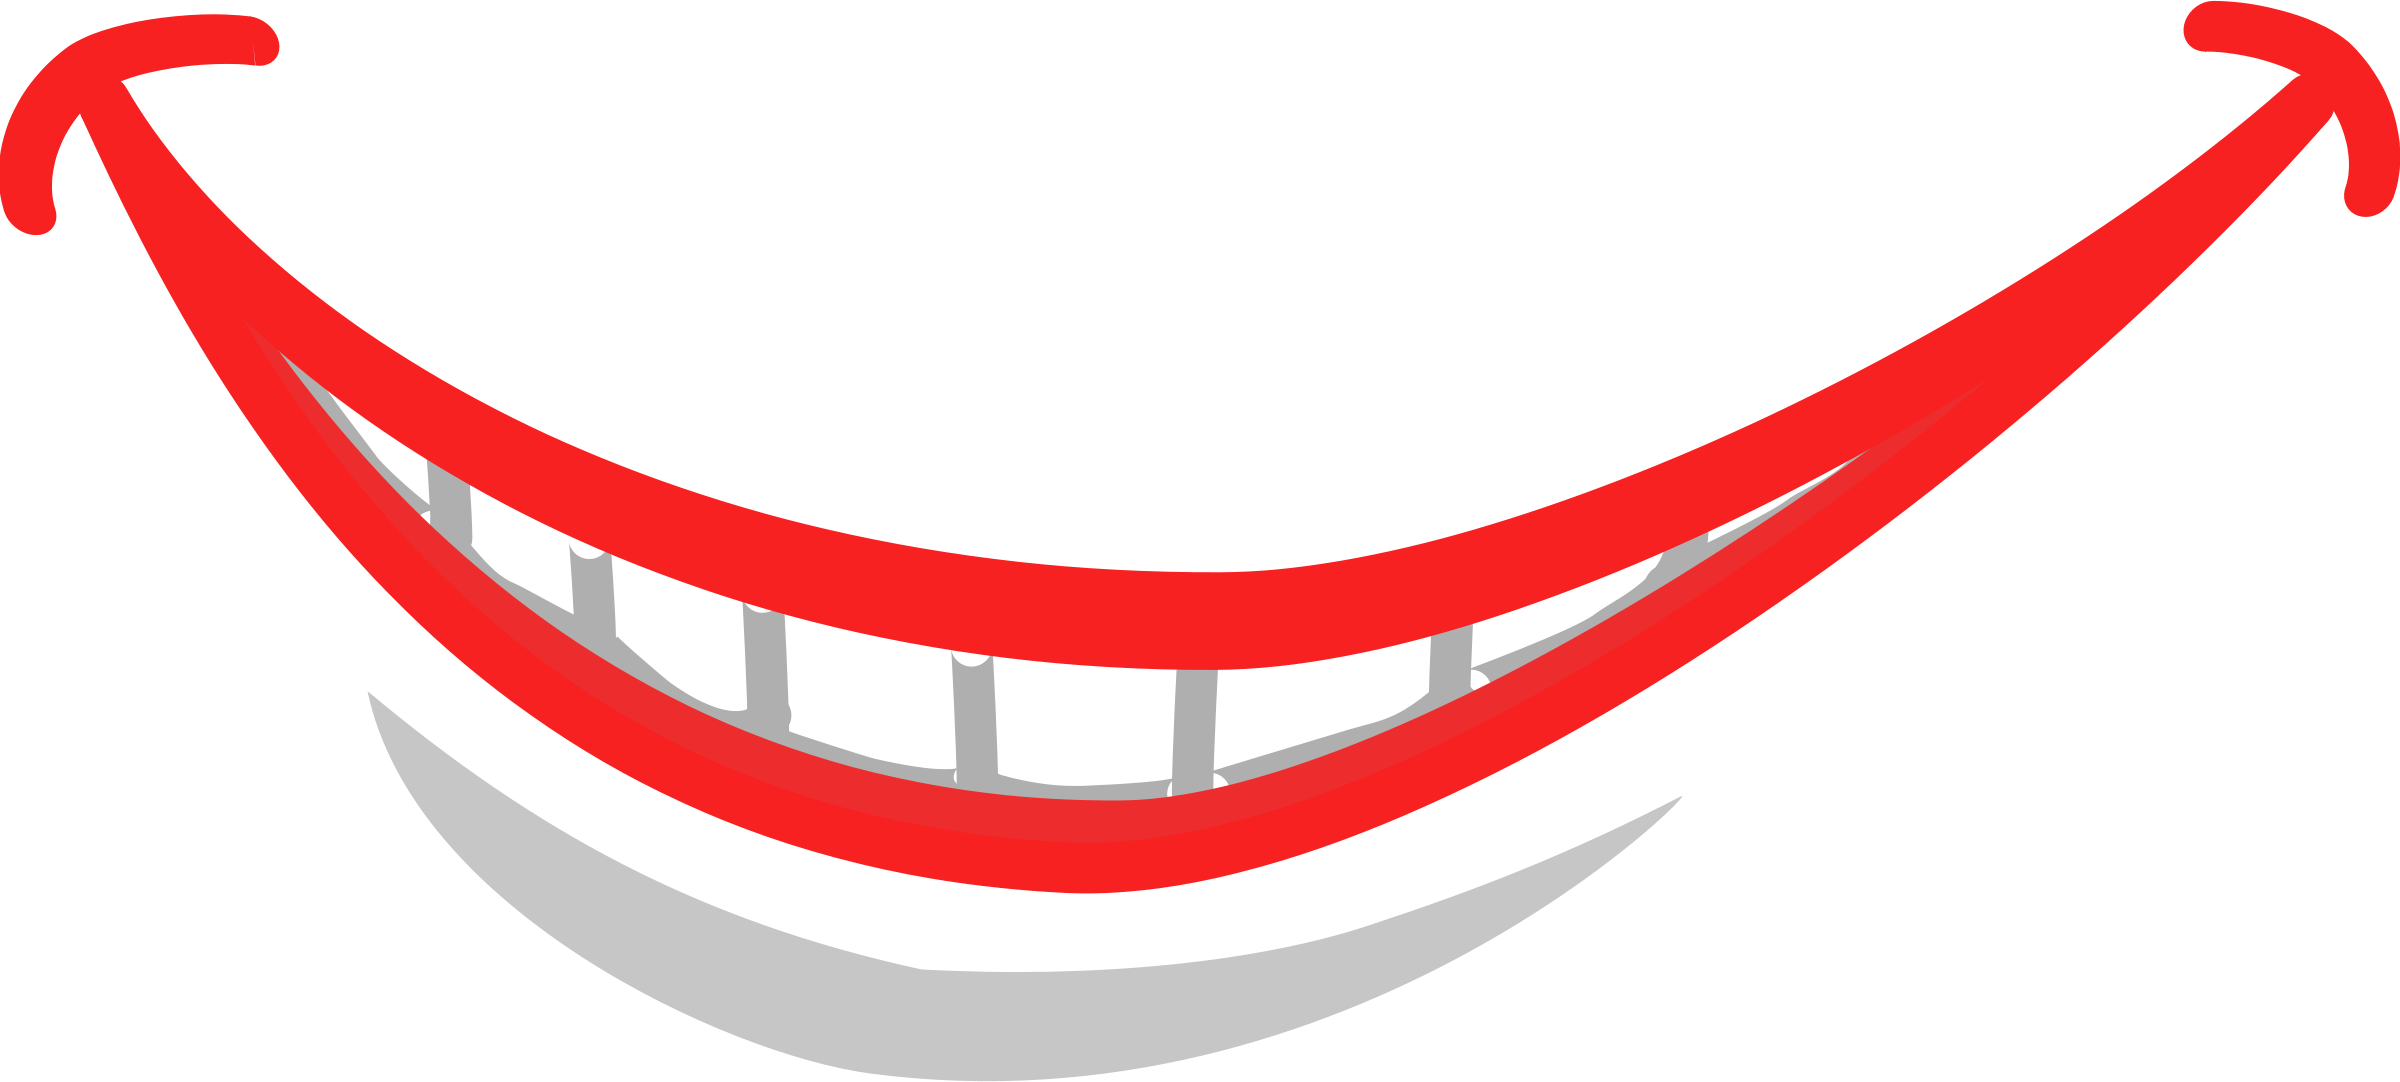 Red Smile Logo - Smile house freeuse - RR collections